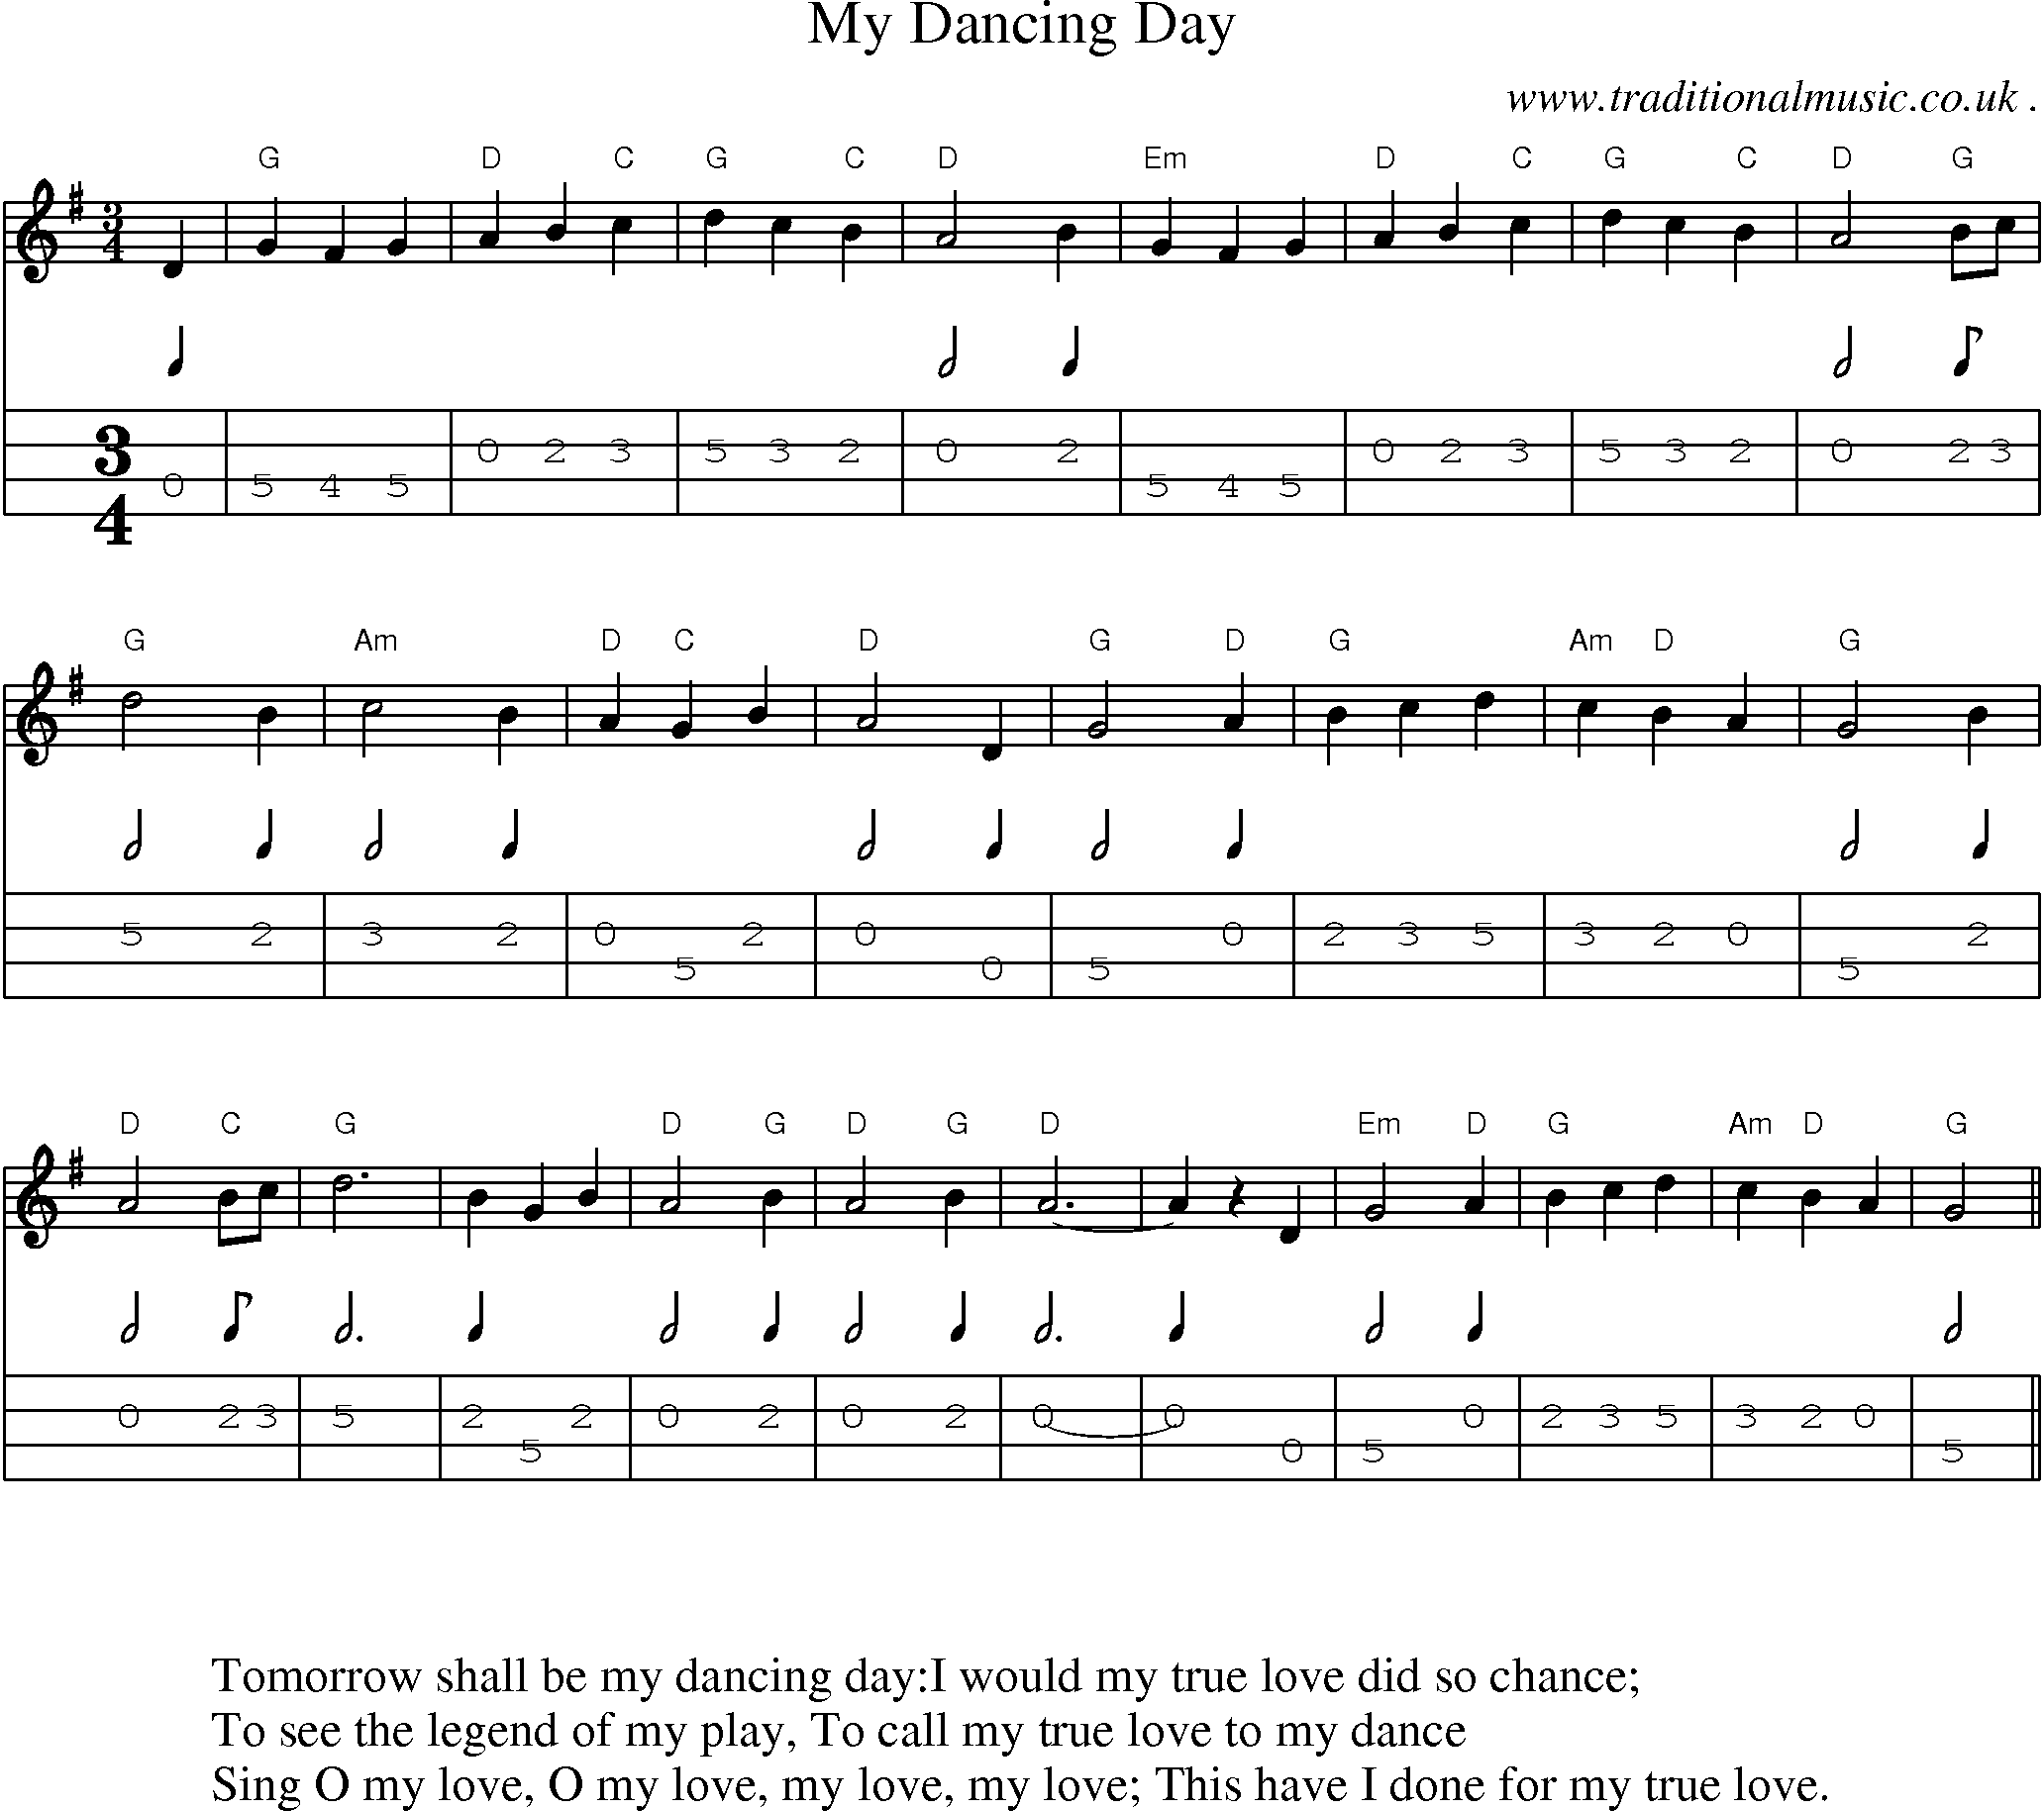 Music Score and Guitar Tabs for My Dancing Day